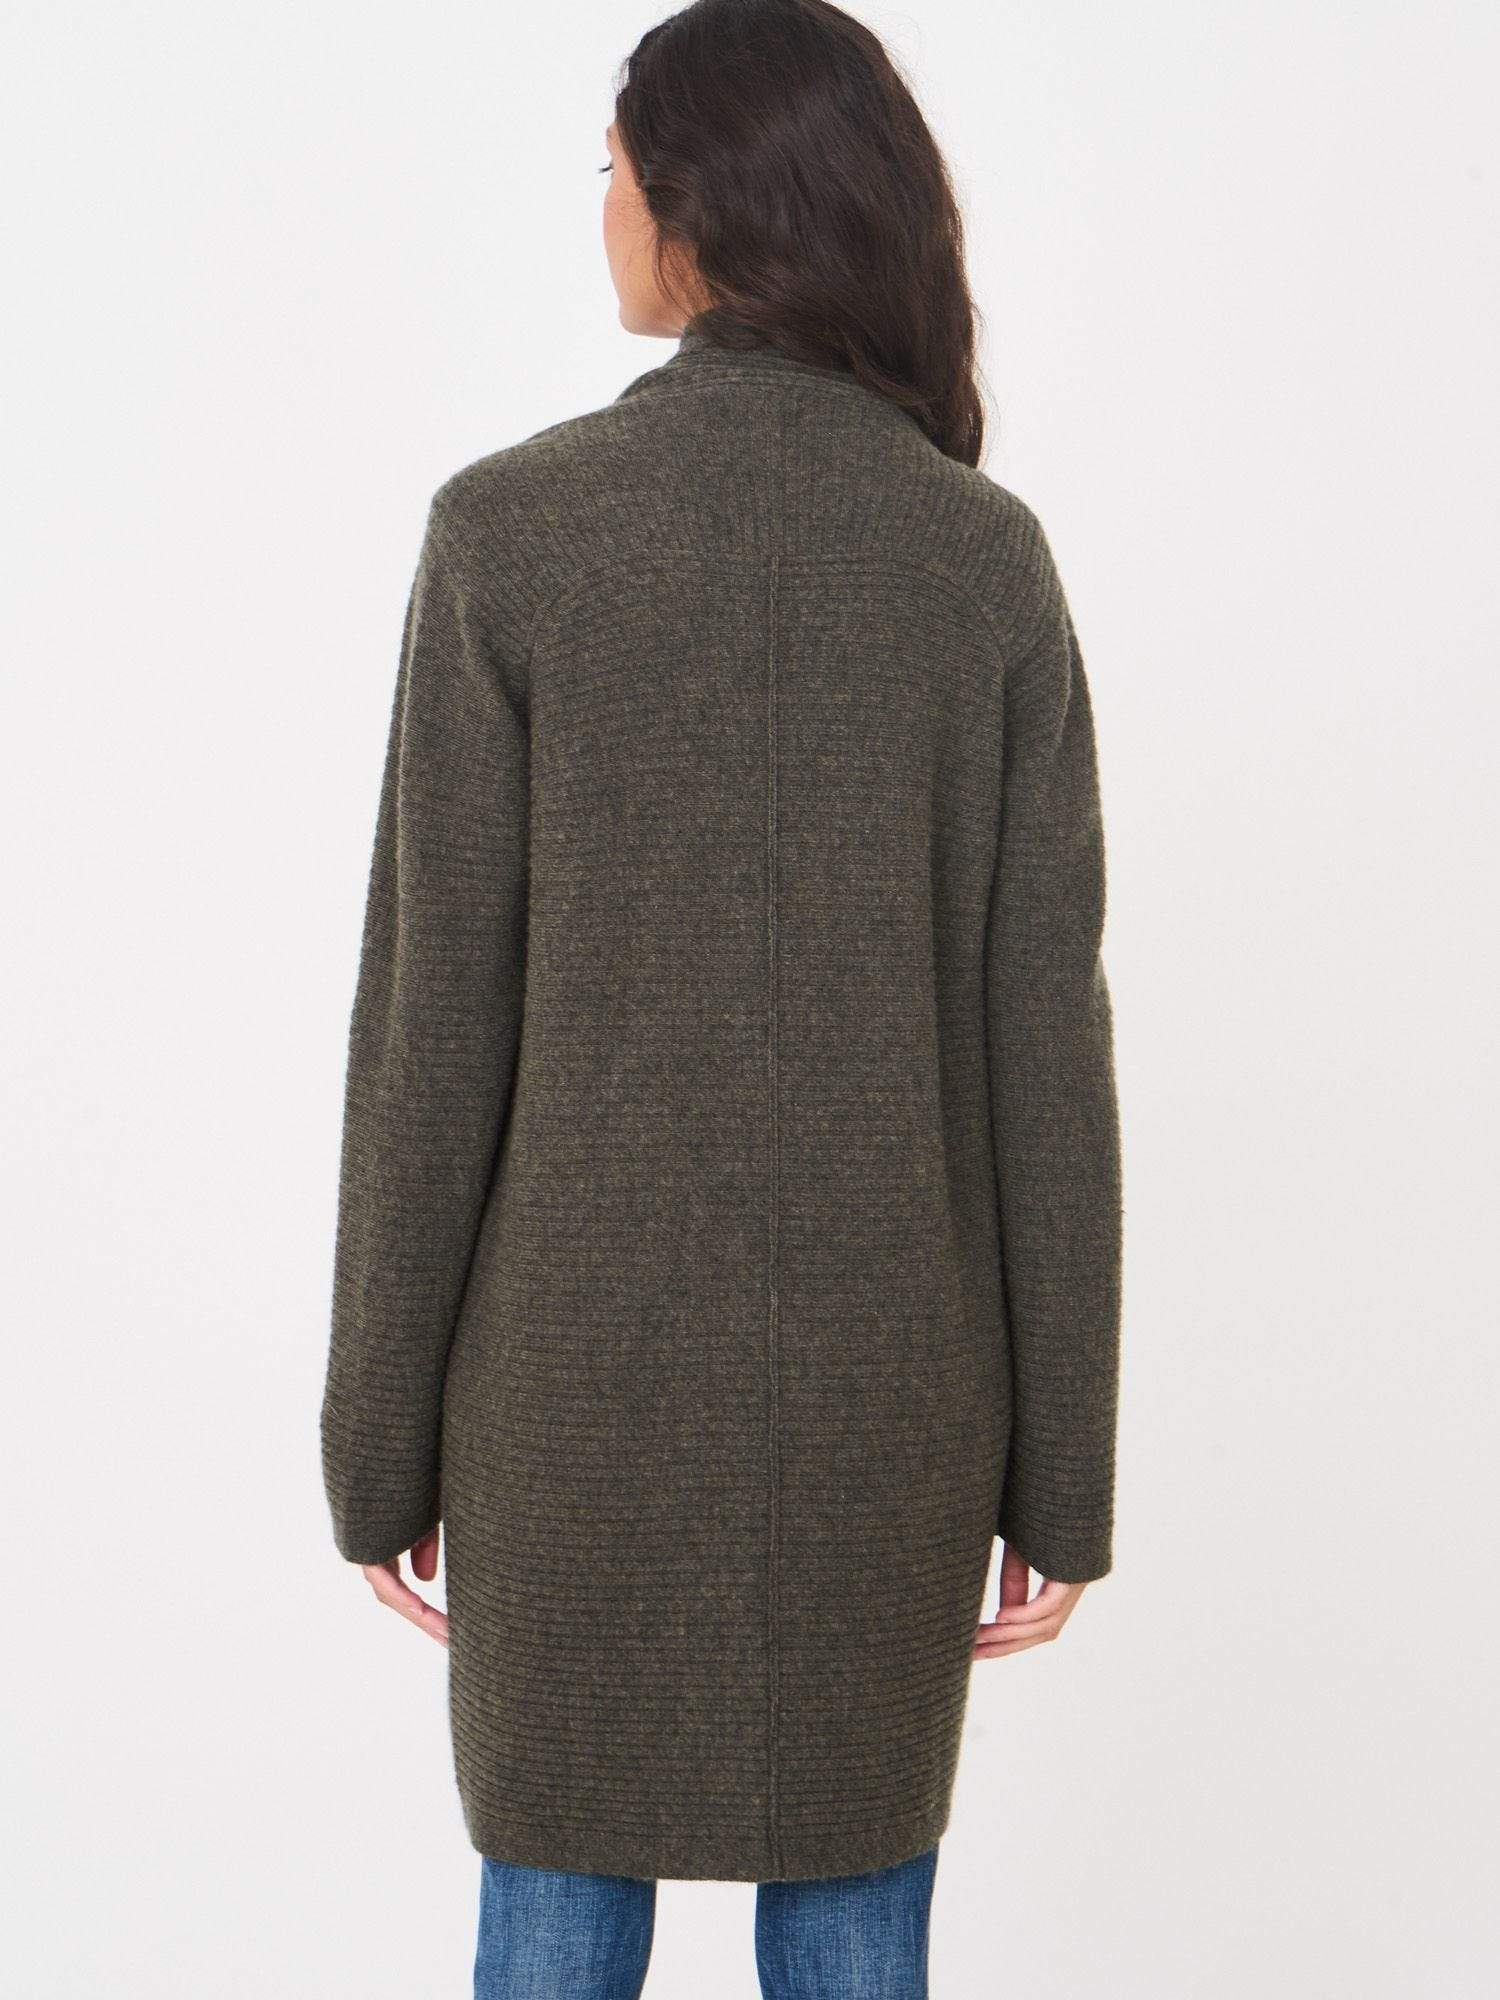 Repeat Cashmere Sweaters 38 Repeat Cashmere Cardigan - Long rib knit in Khaki Olive